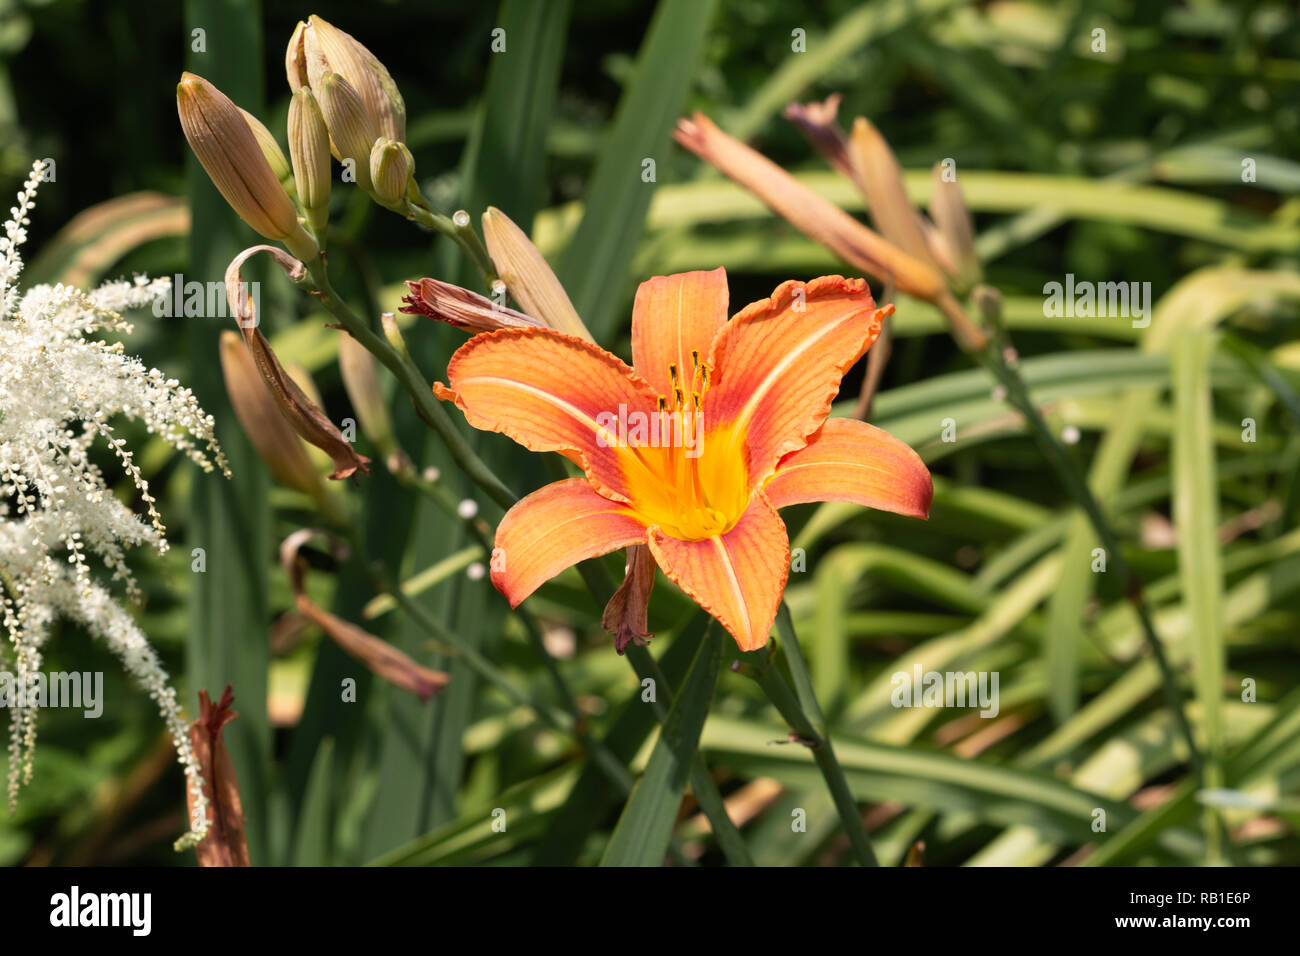 Orange Day Lily growing in a garden Stock Photo